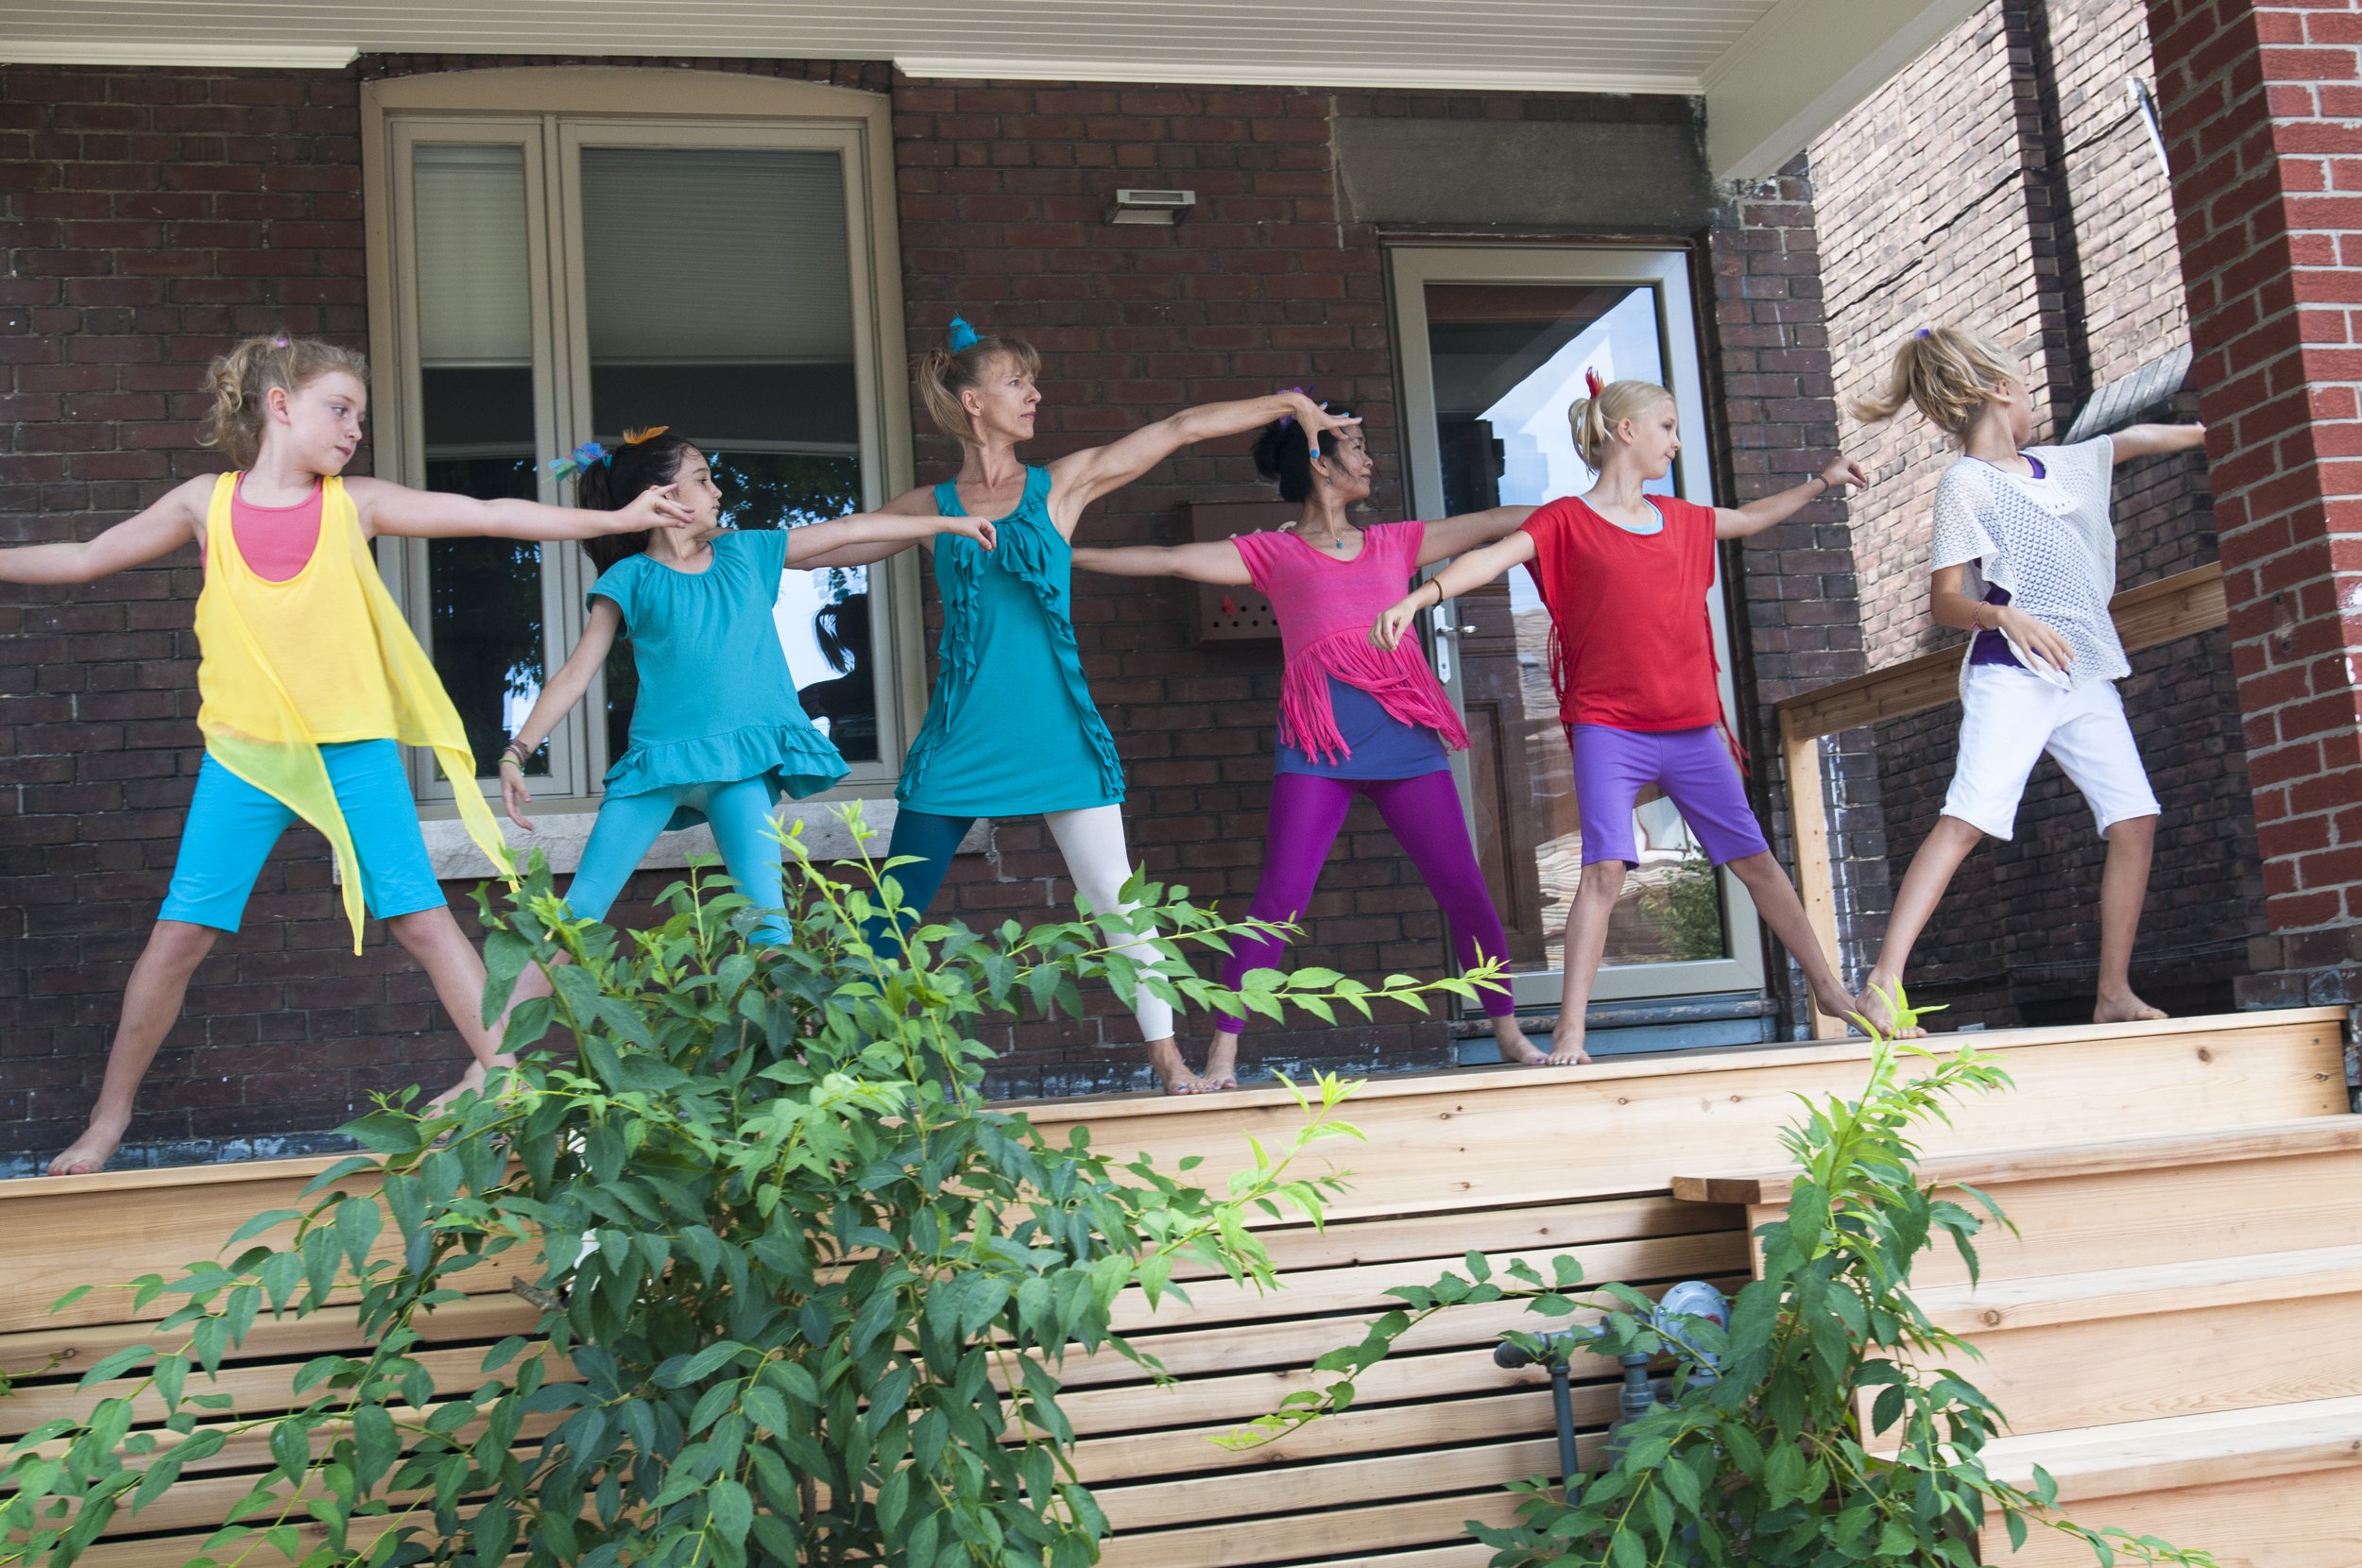 A group of young community participants on a porch with arms outstretched.